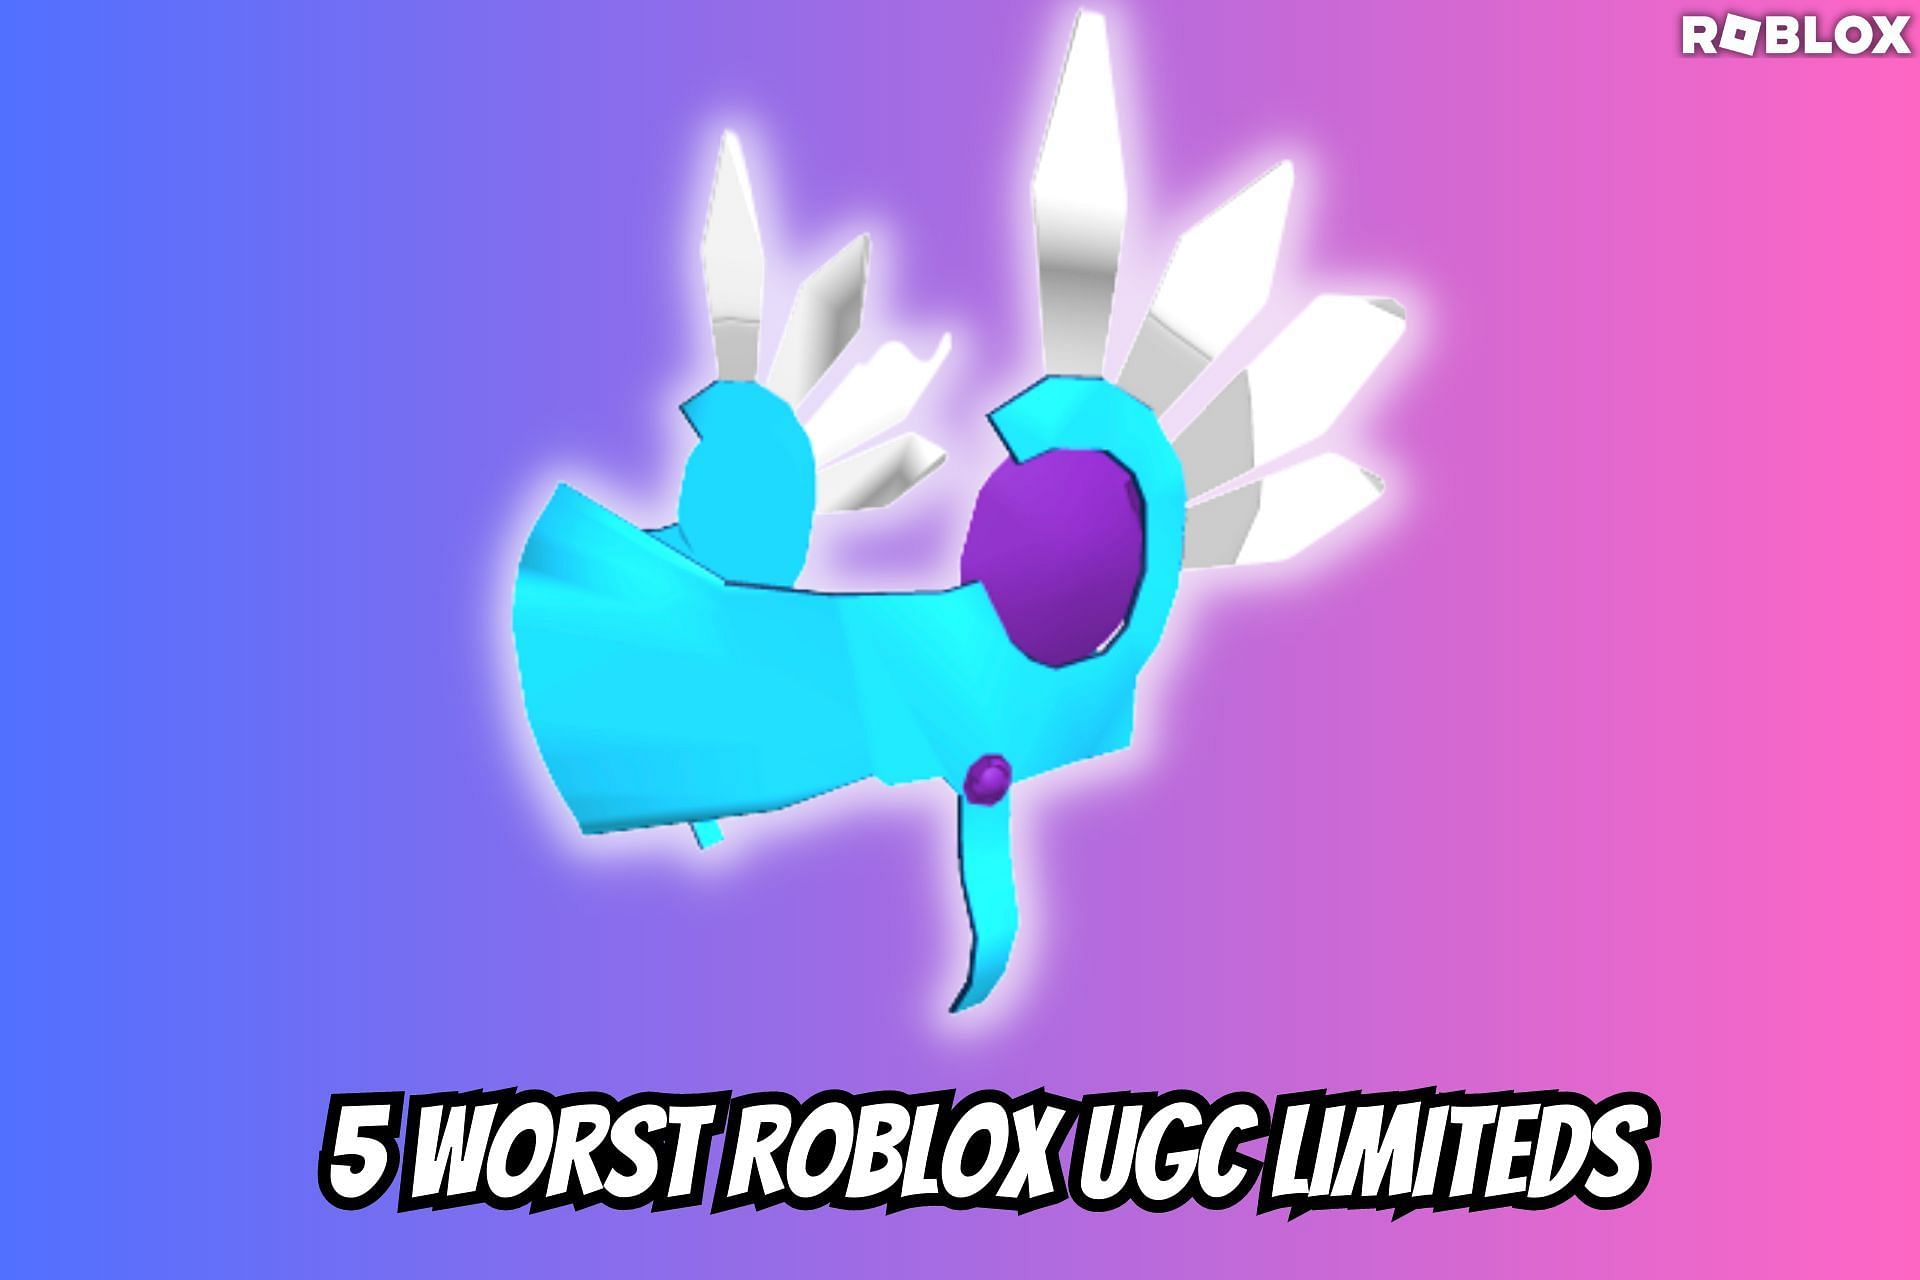 Roblox UGC LIMITED! What to WATCH OUT? Should You Buy? (Roblox) 